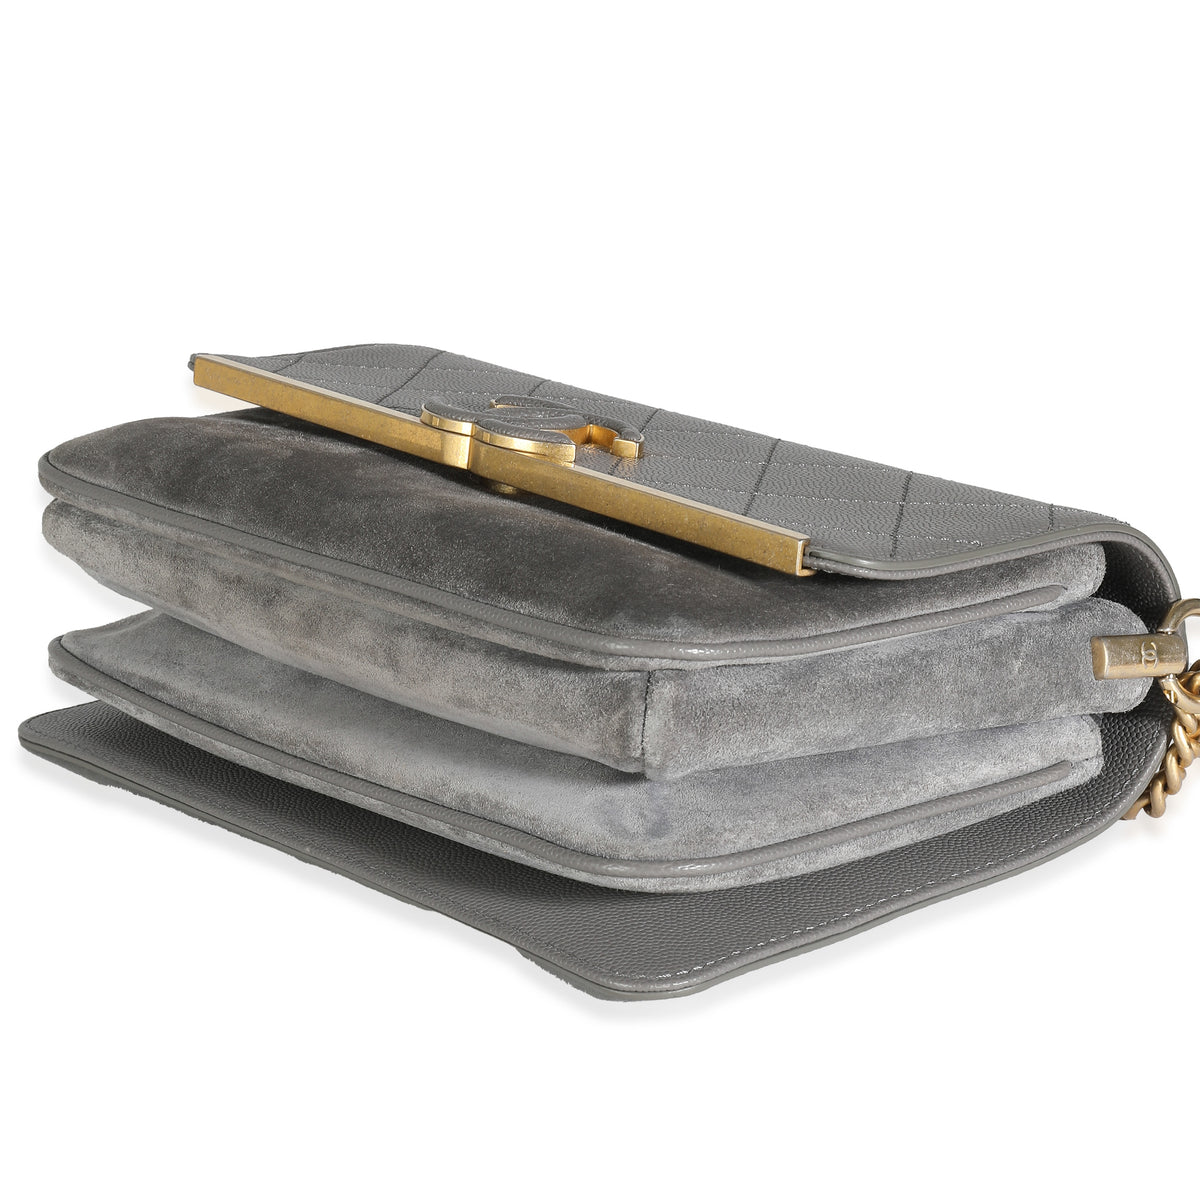 Grey Quilted Caviar Suede Coco Flap Bag